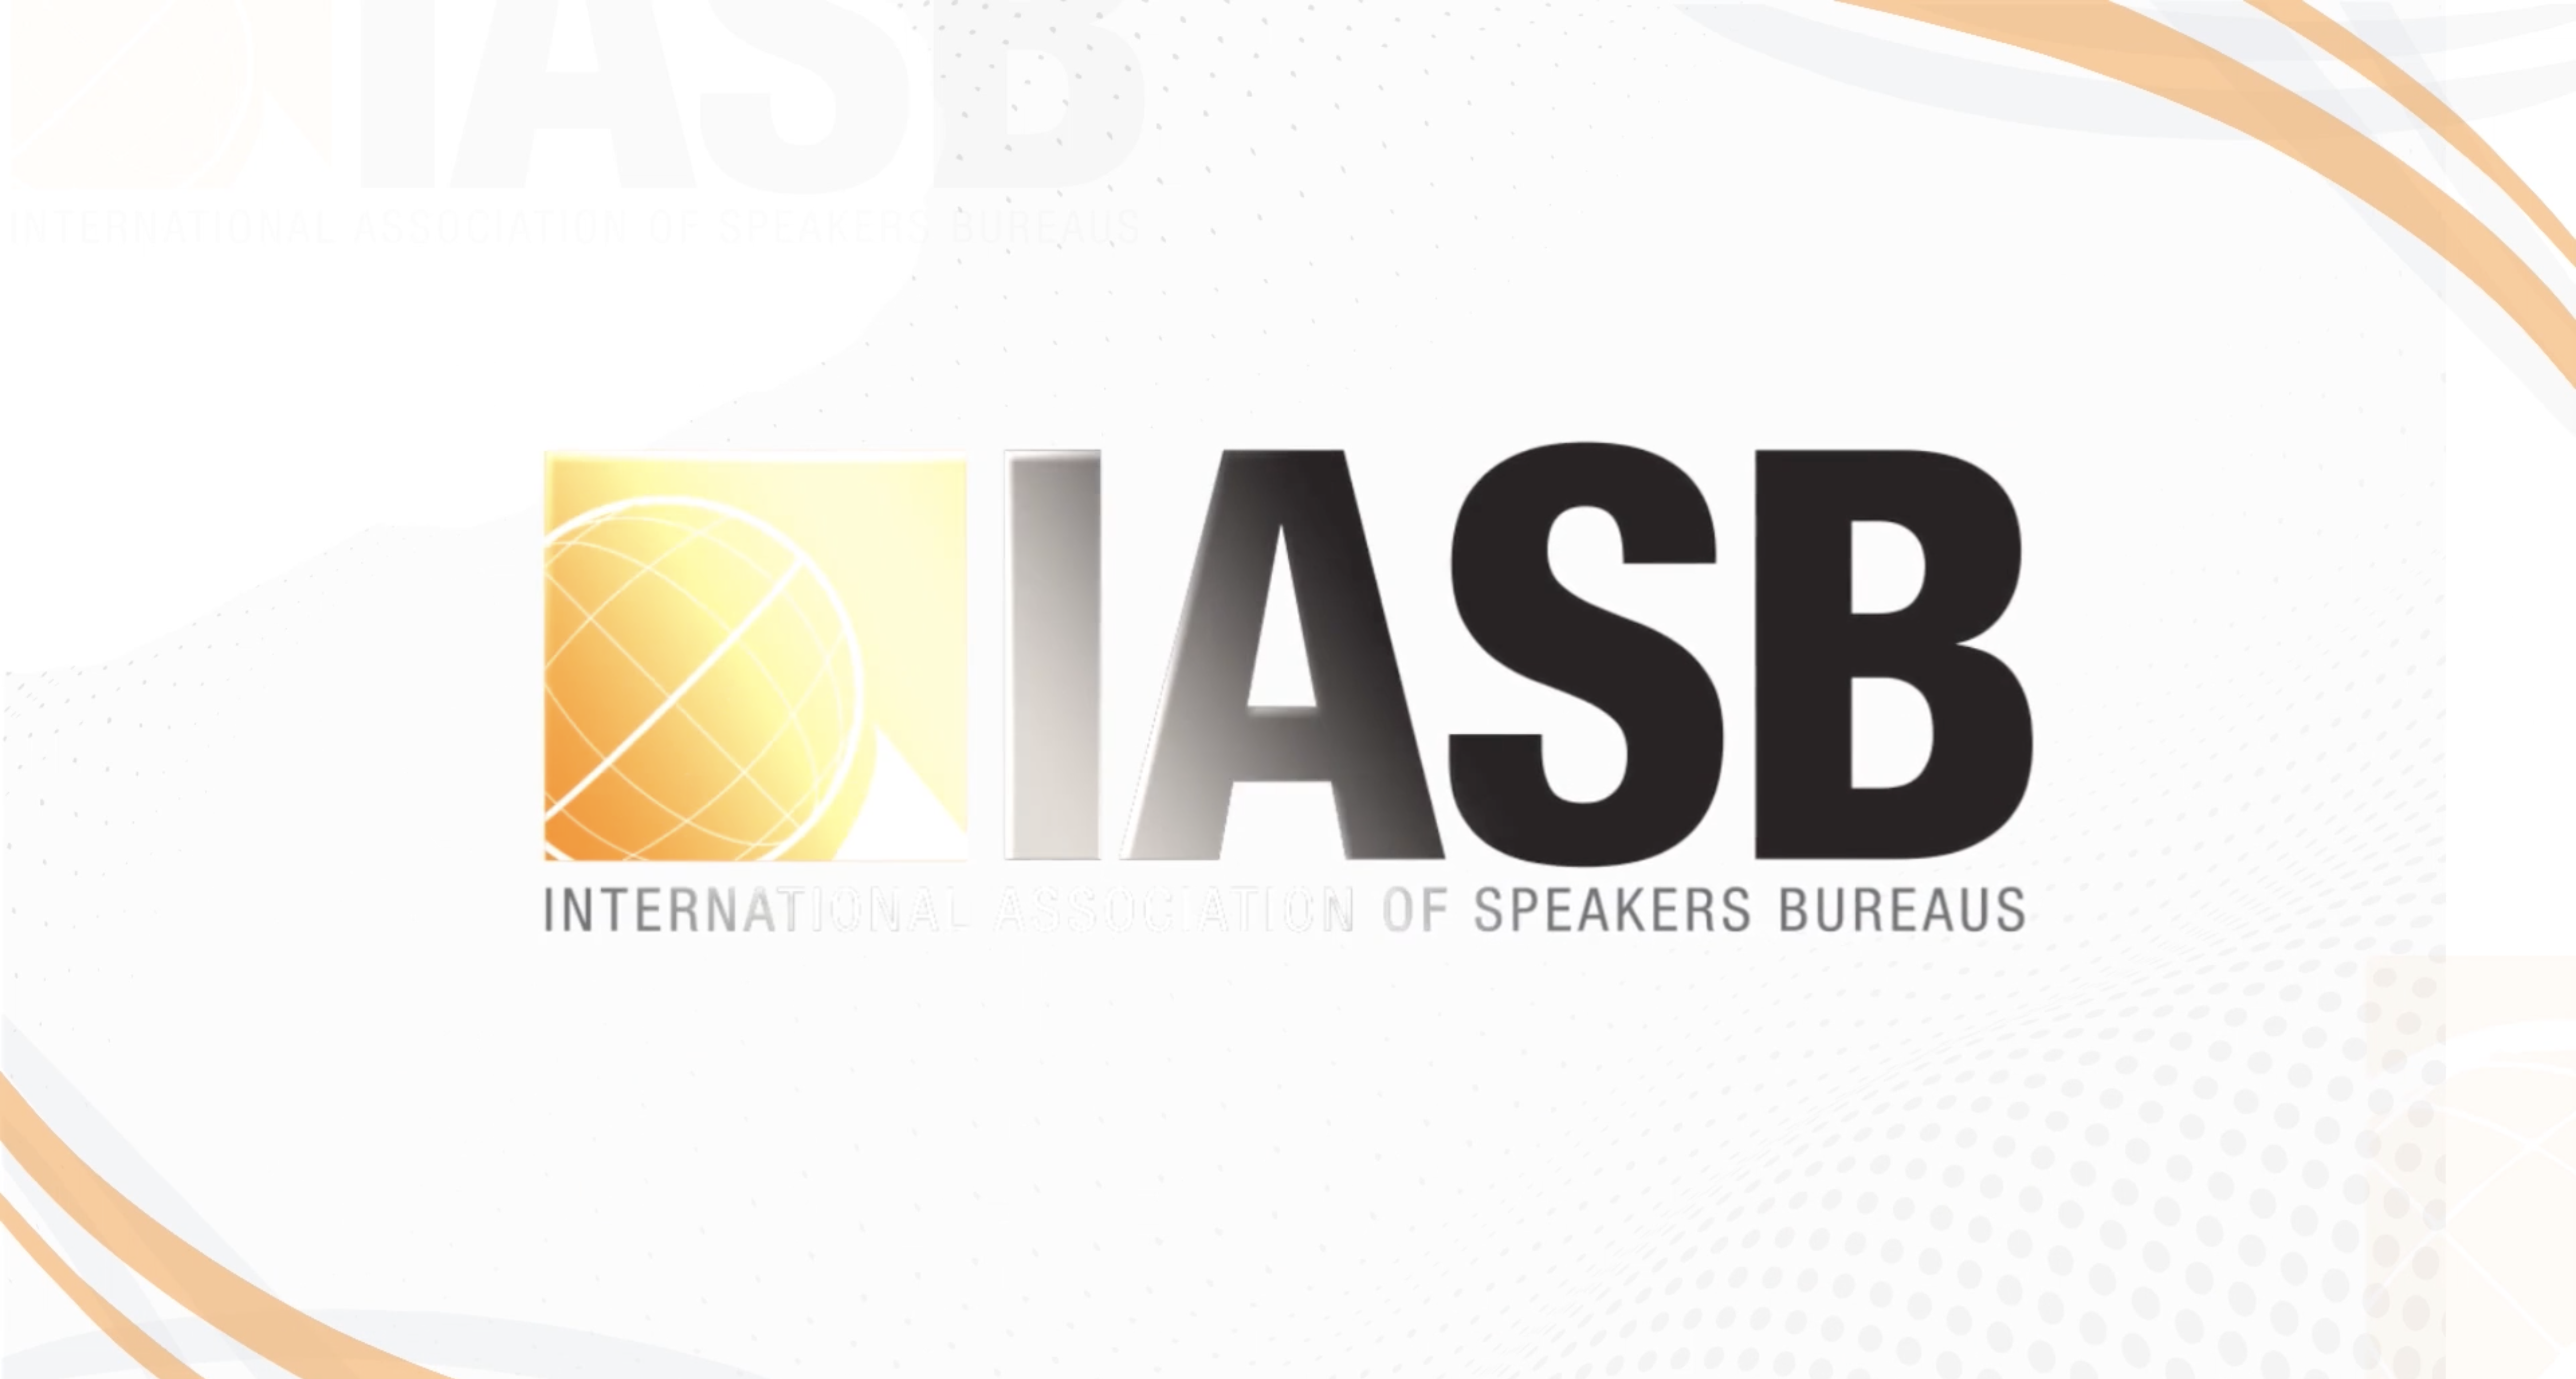 IASB : Committed and Celebrated